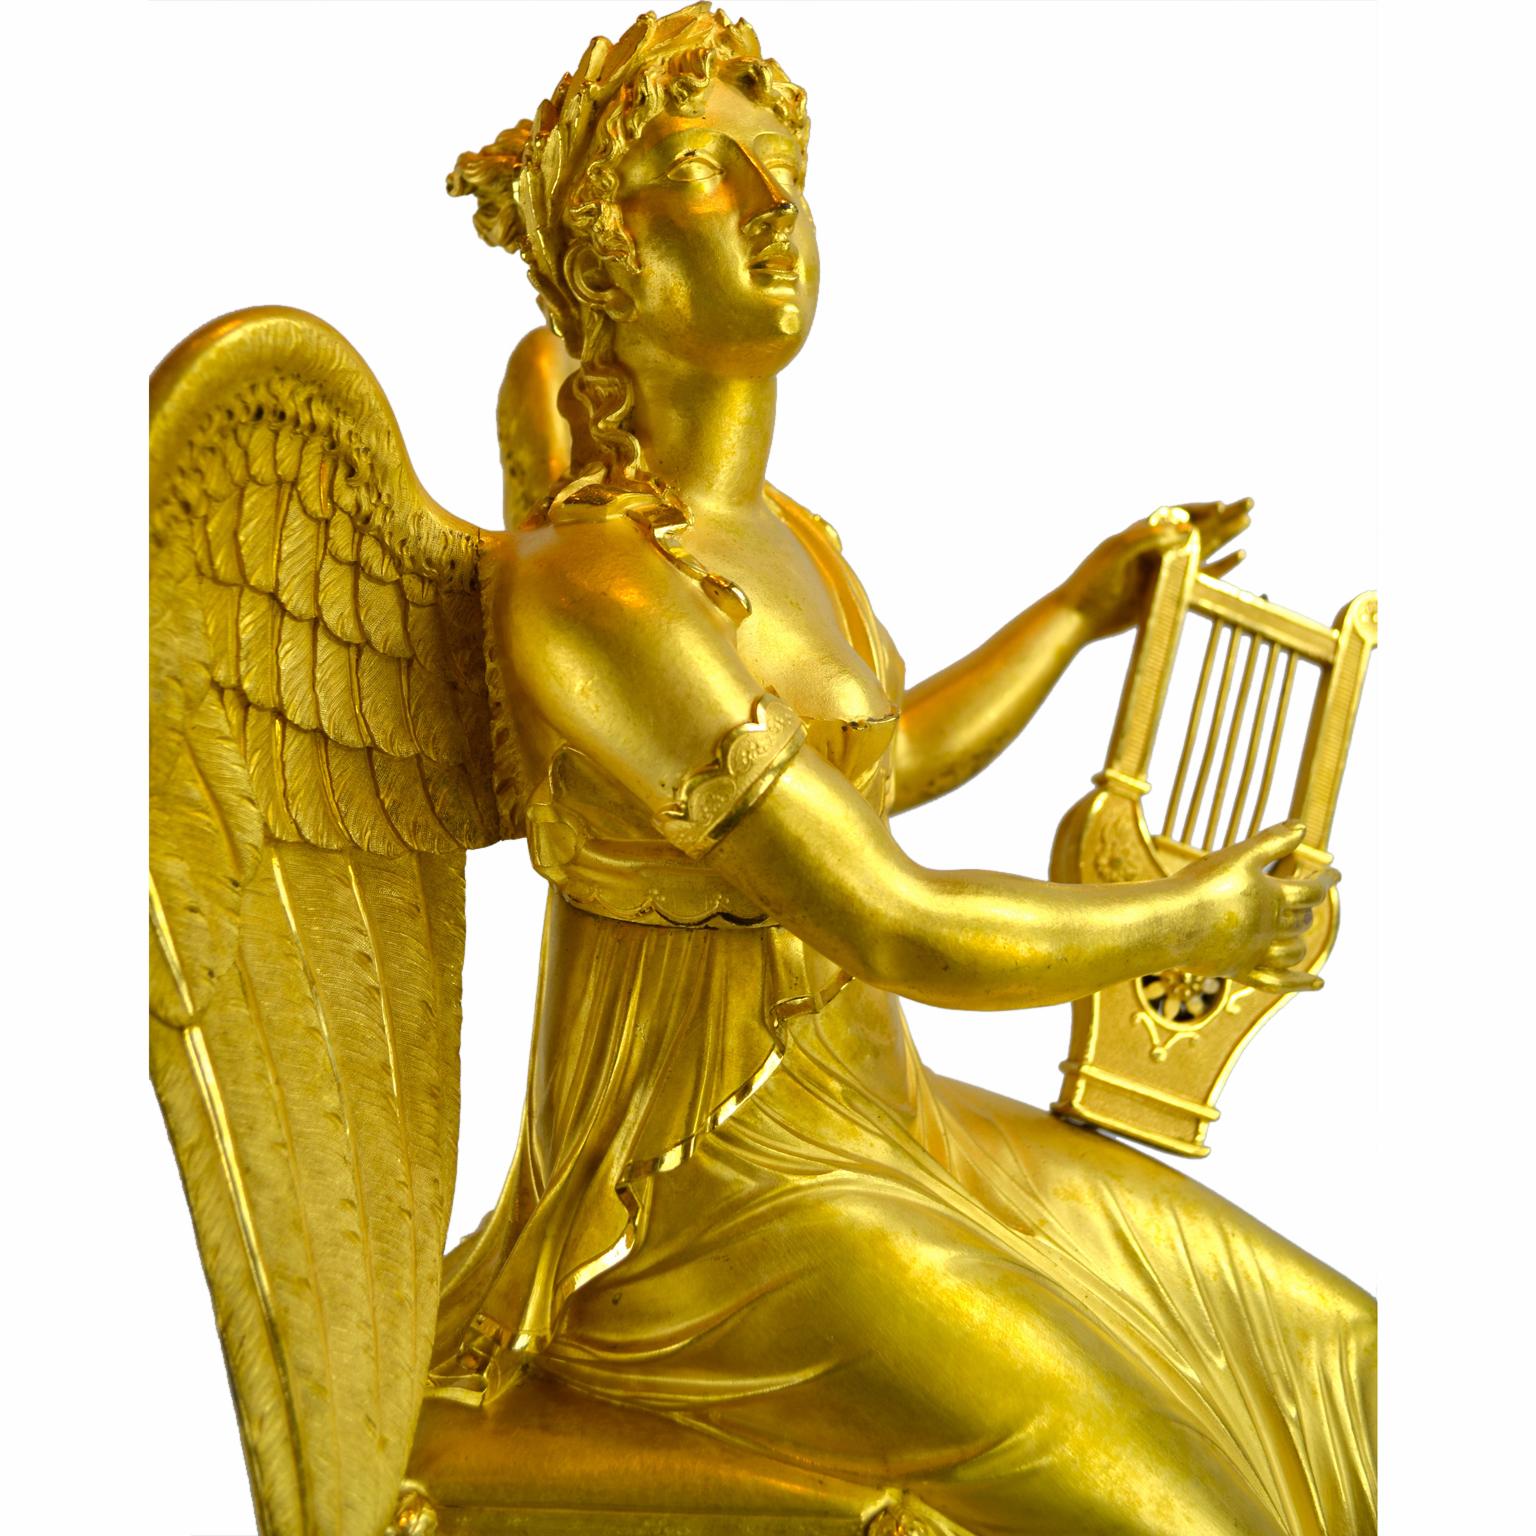 Gilt Empire Clock Depicting Clio the Muse of History and Music